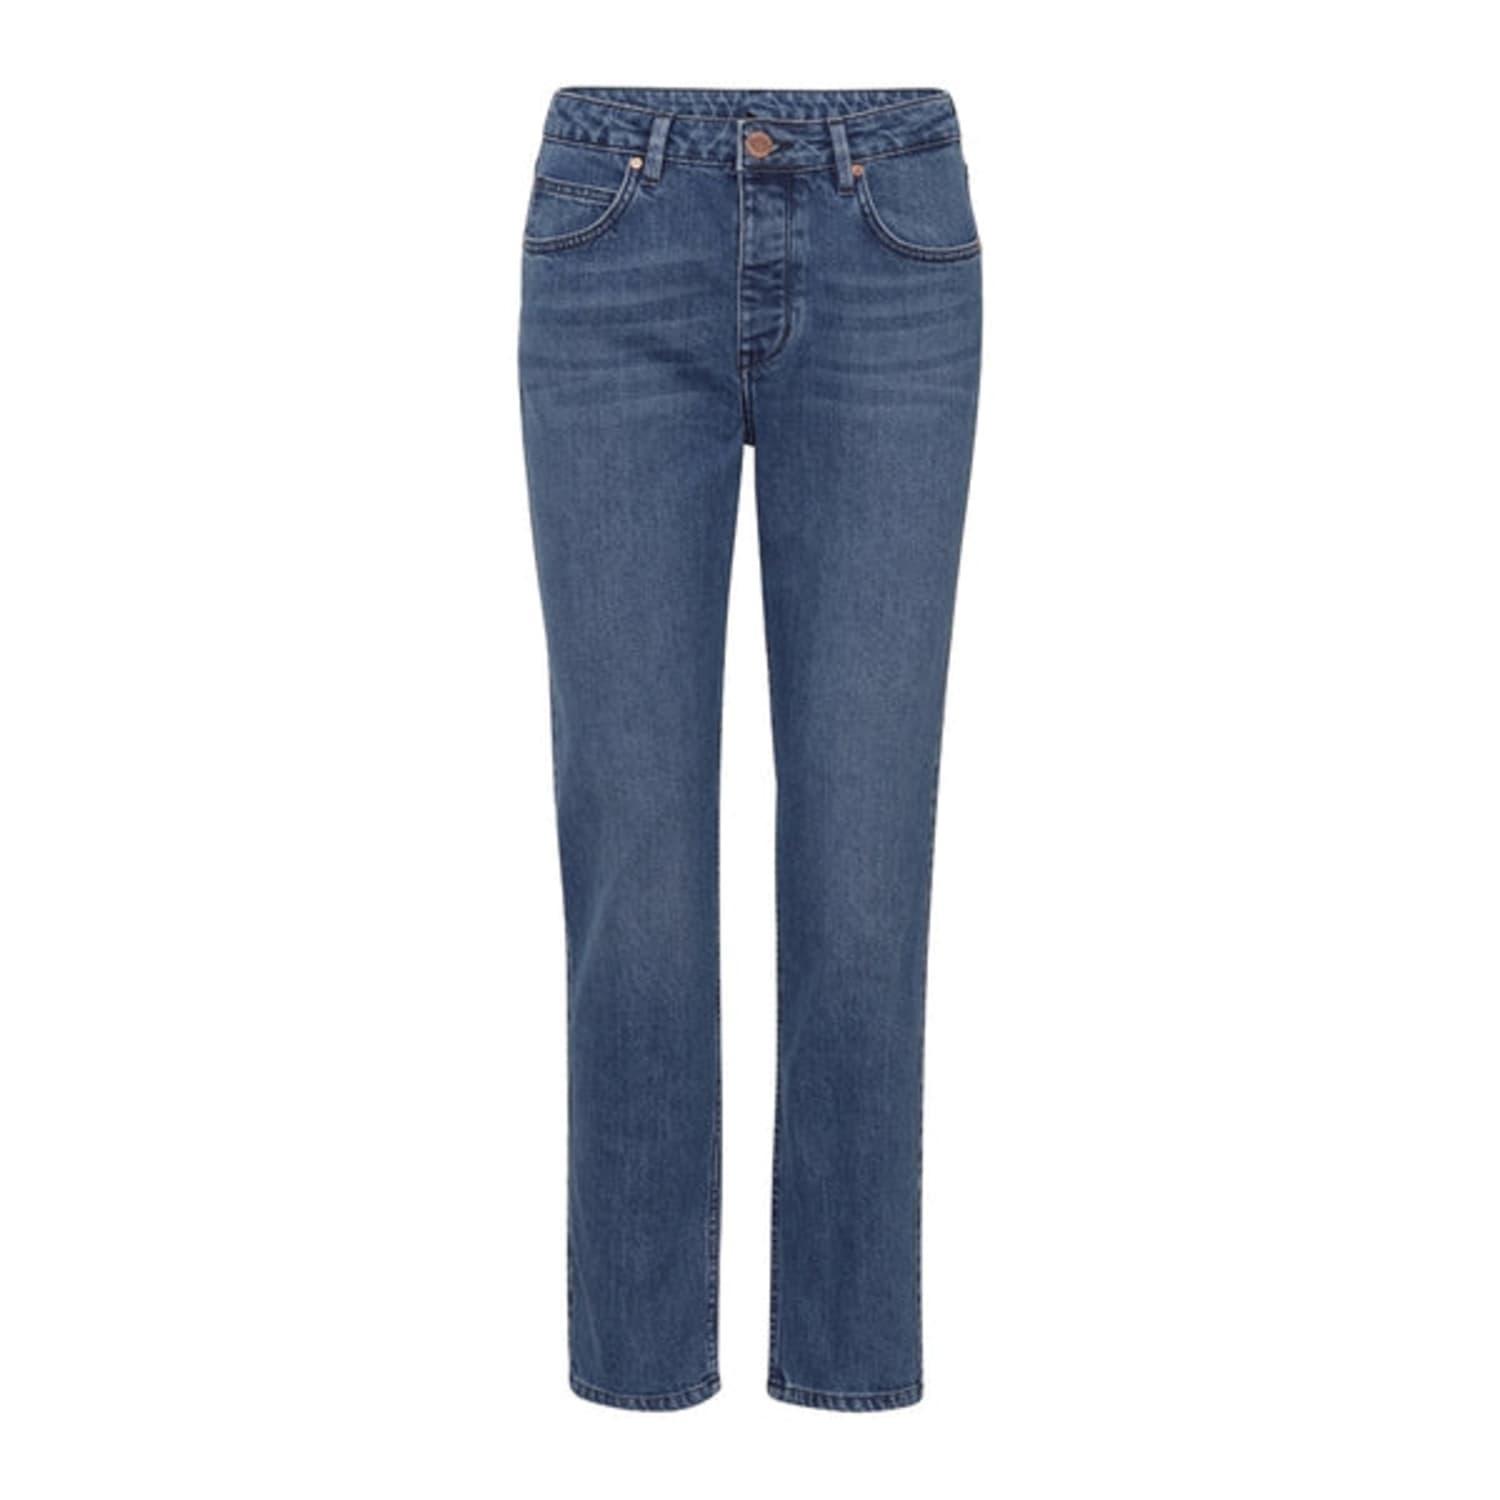 2nd Day Blue Riggis Jeans | Lyst